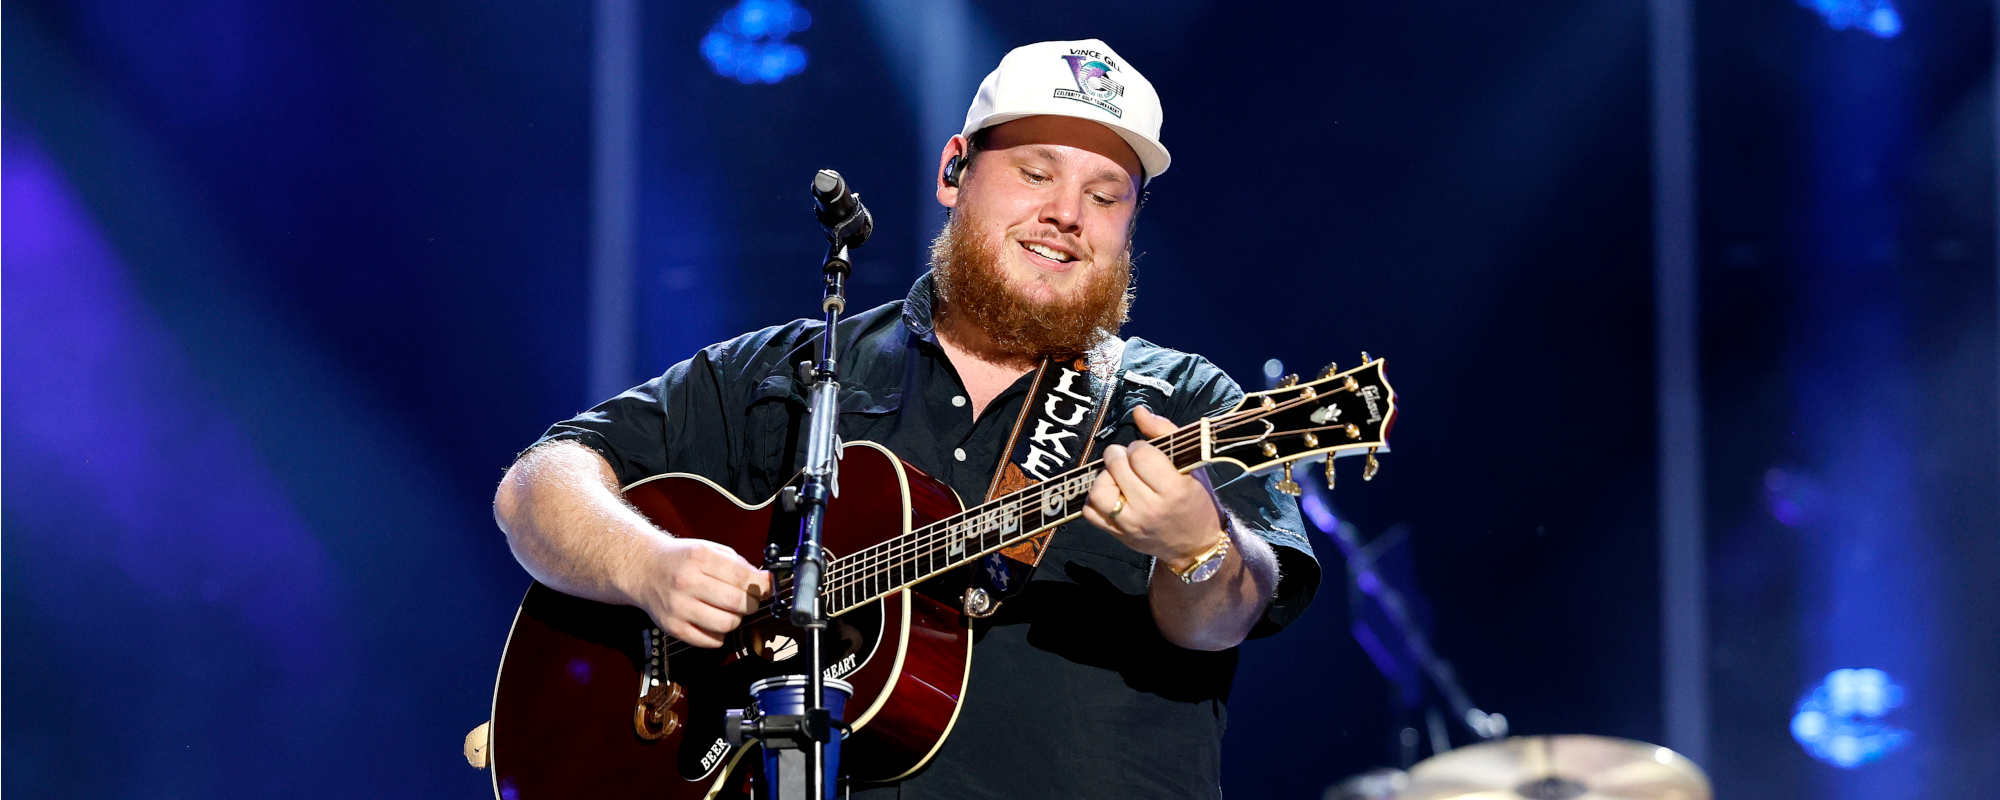 Luke Combs Makes Amends After Lawsuit Ordered Woman To Pay $250,000 Over $380 Tumblers: “It Makes Me Sick”